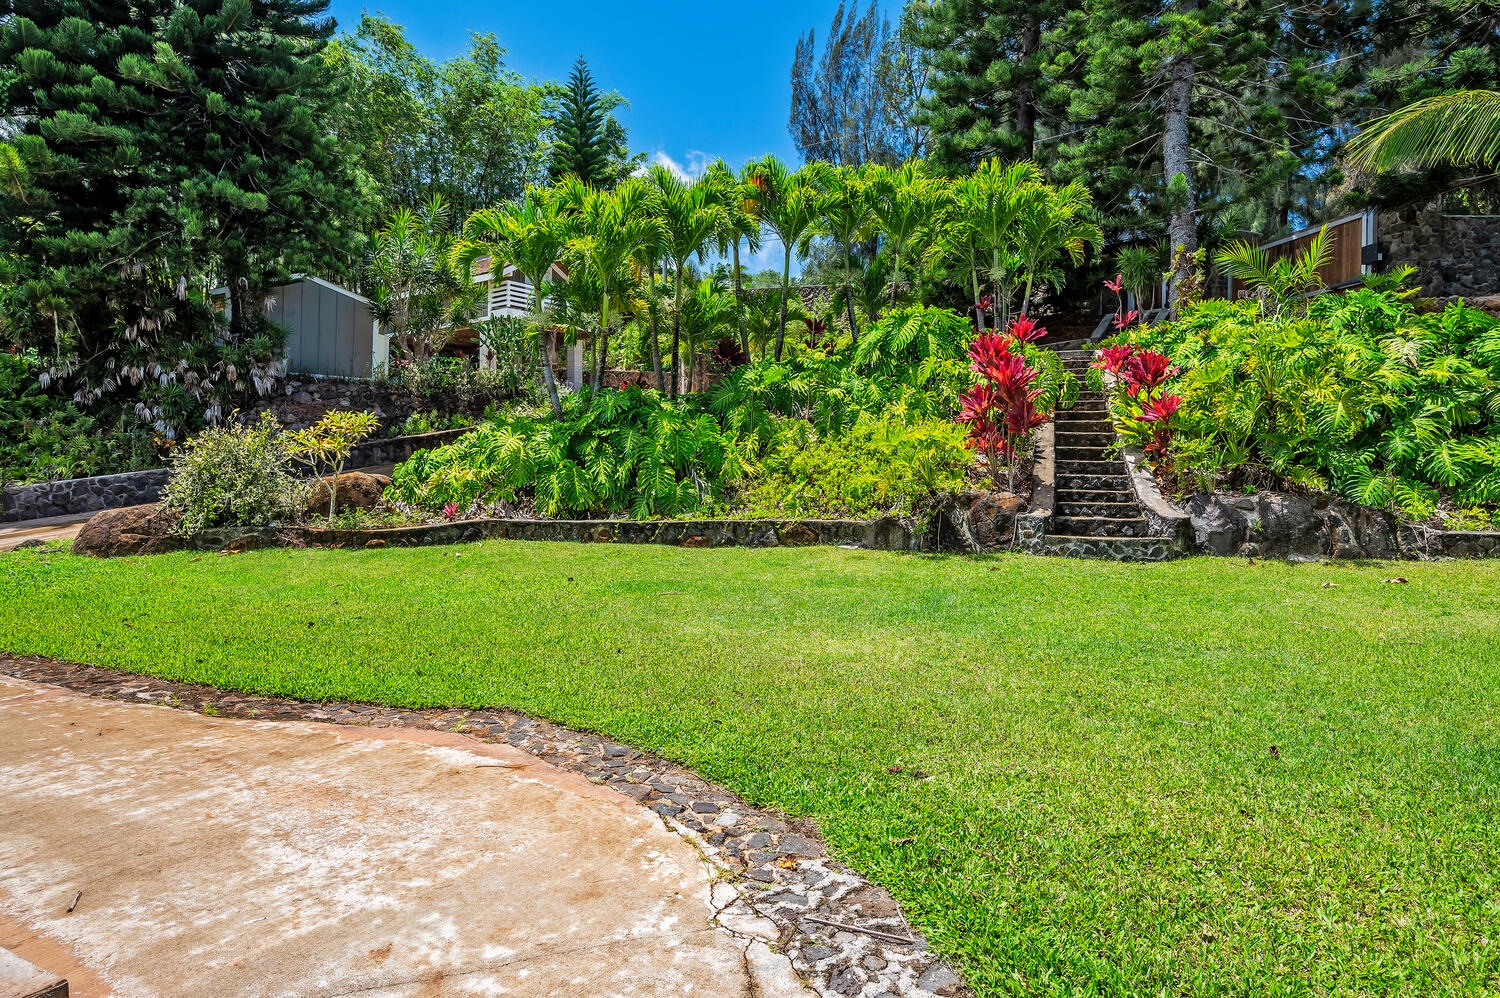 Haleiwa Vacation Rentals, Mele Makana - Enjoy the seclusion of your beautifully landscaped private yard